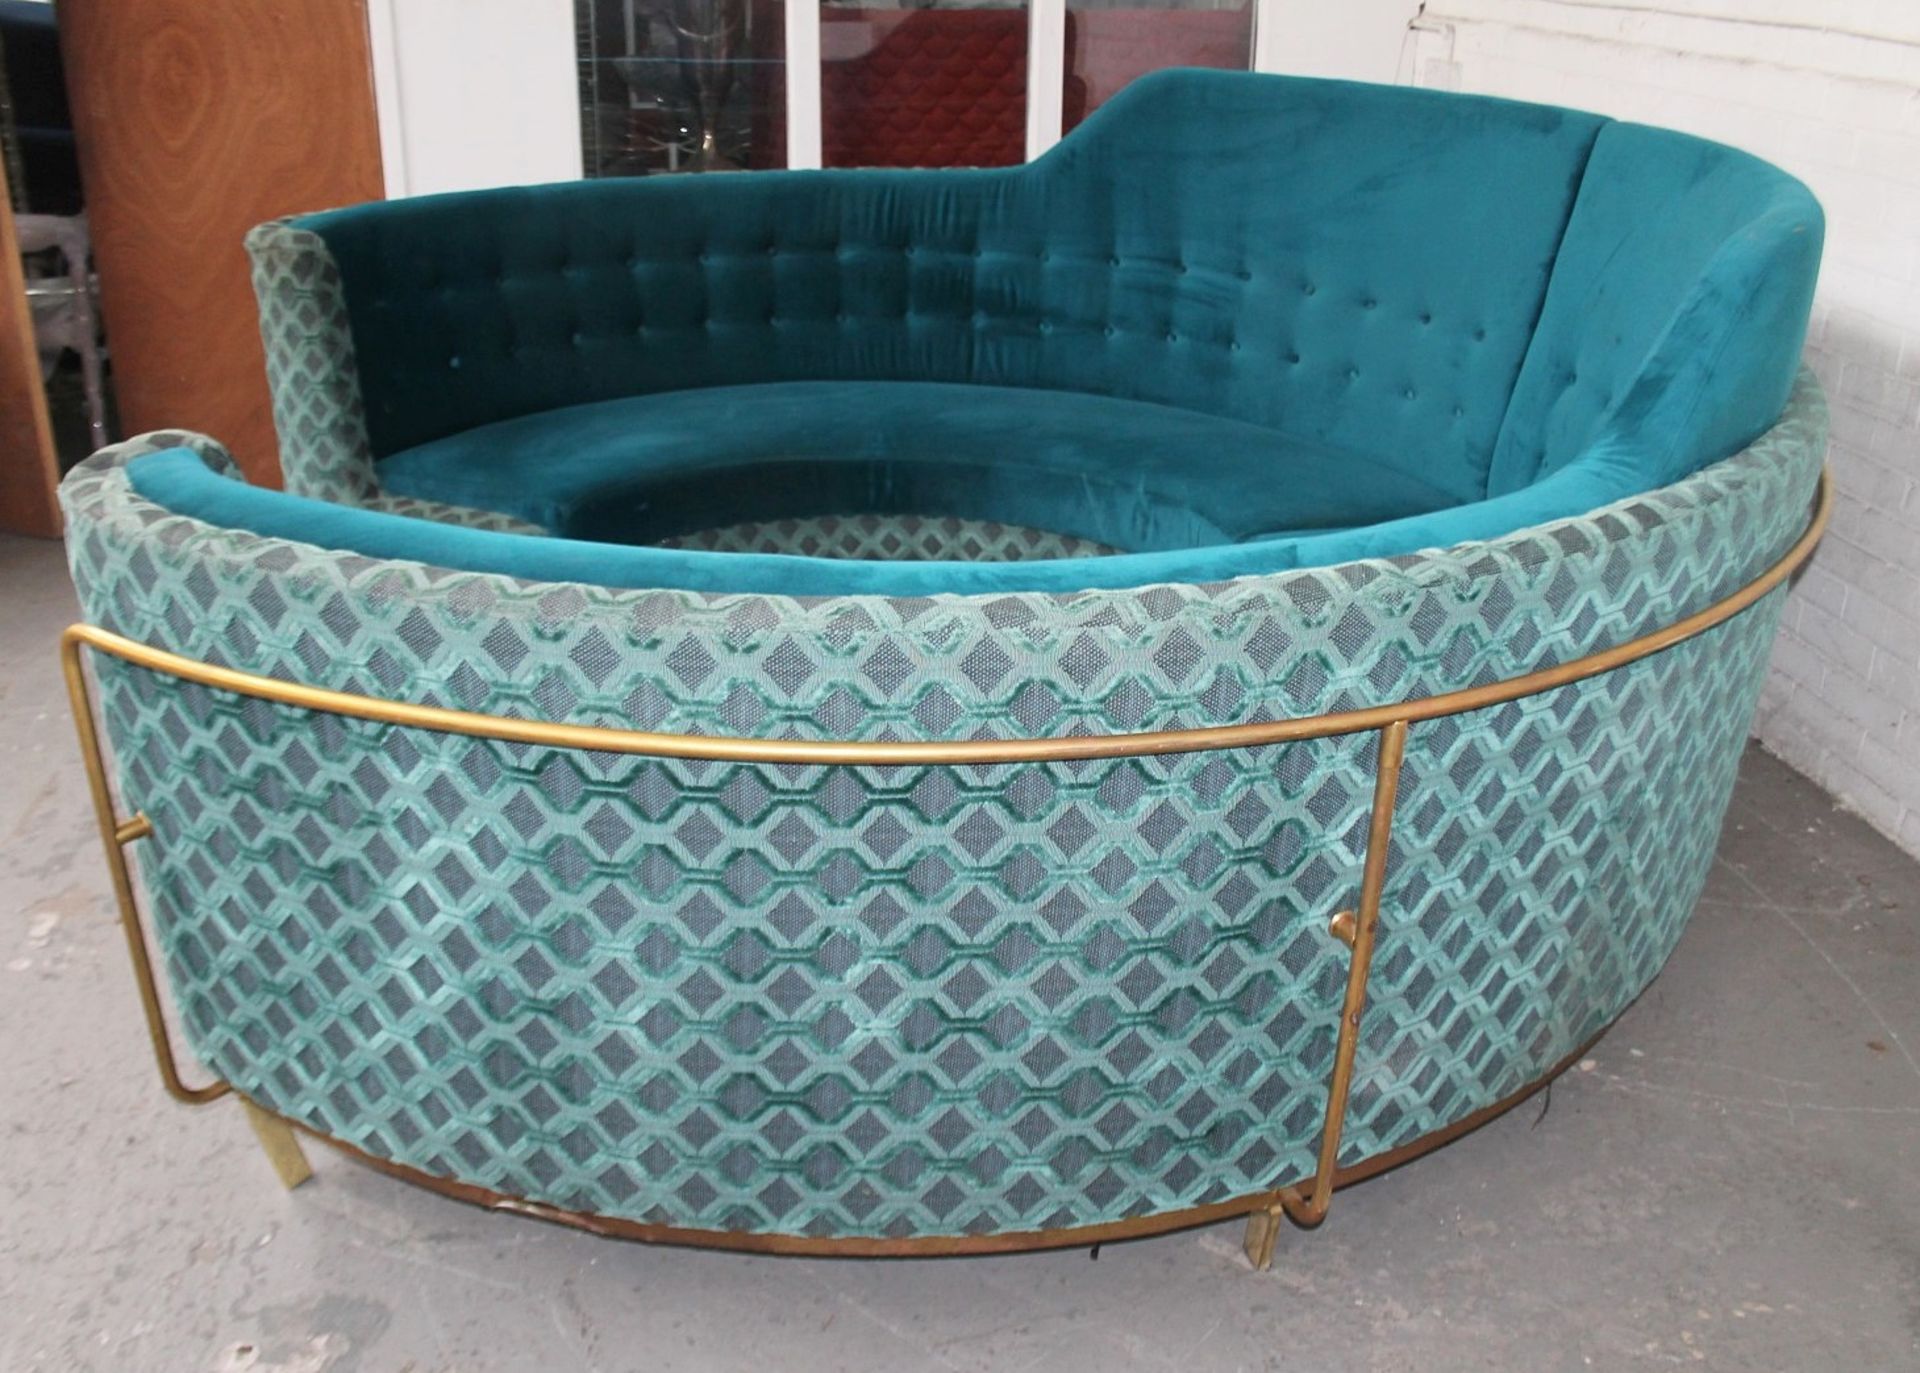 1 x Bespoke Commercial Curved C-Shaped Booth Seating Upholstered In Premium Teal Coloured Fabrics - - Image 6 of 17